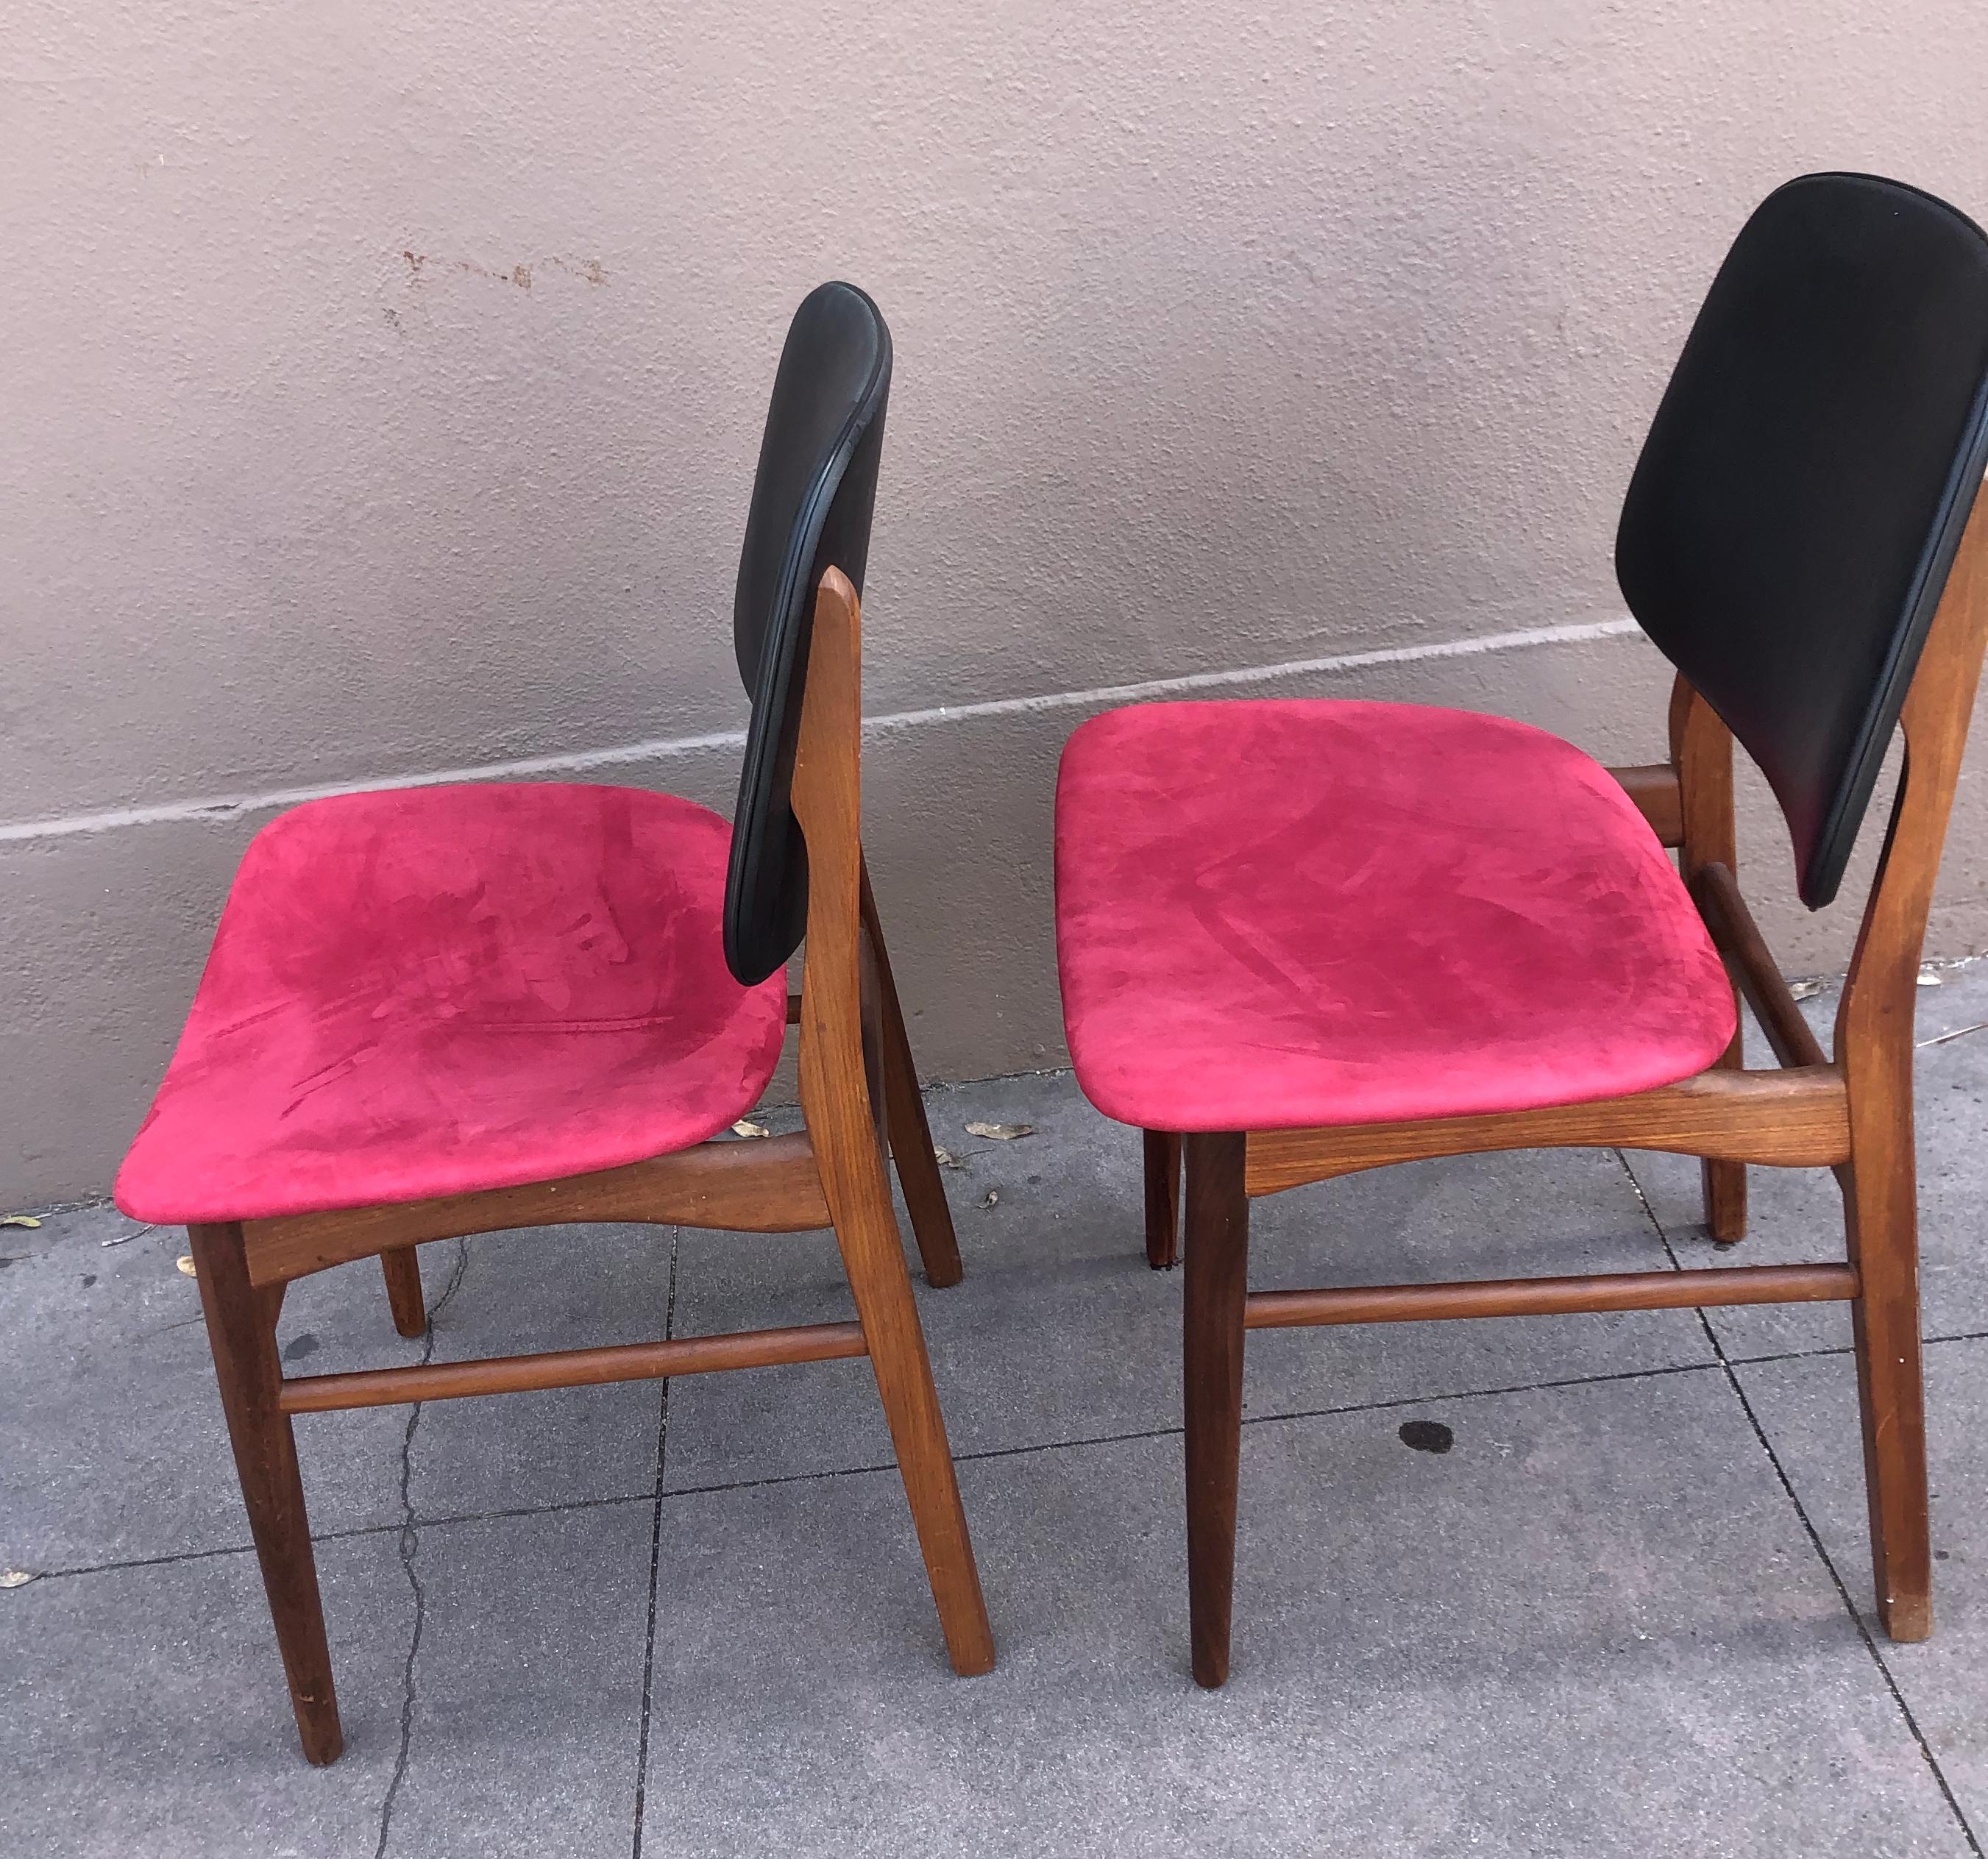 This is an excellent set of 2 danish modern dining chairs in the style of Arne Vodder and Arne Hovmand-Olsen. In excellent and ready to use. Made from solid teak. I had the two bottom cushions reupolstered with red natural untreated leather as the